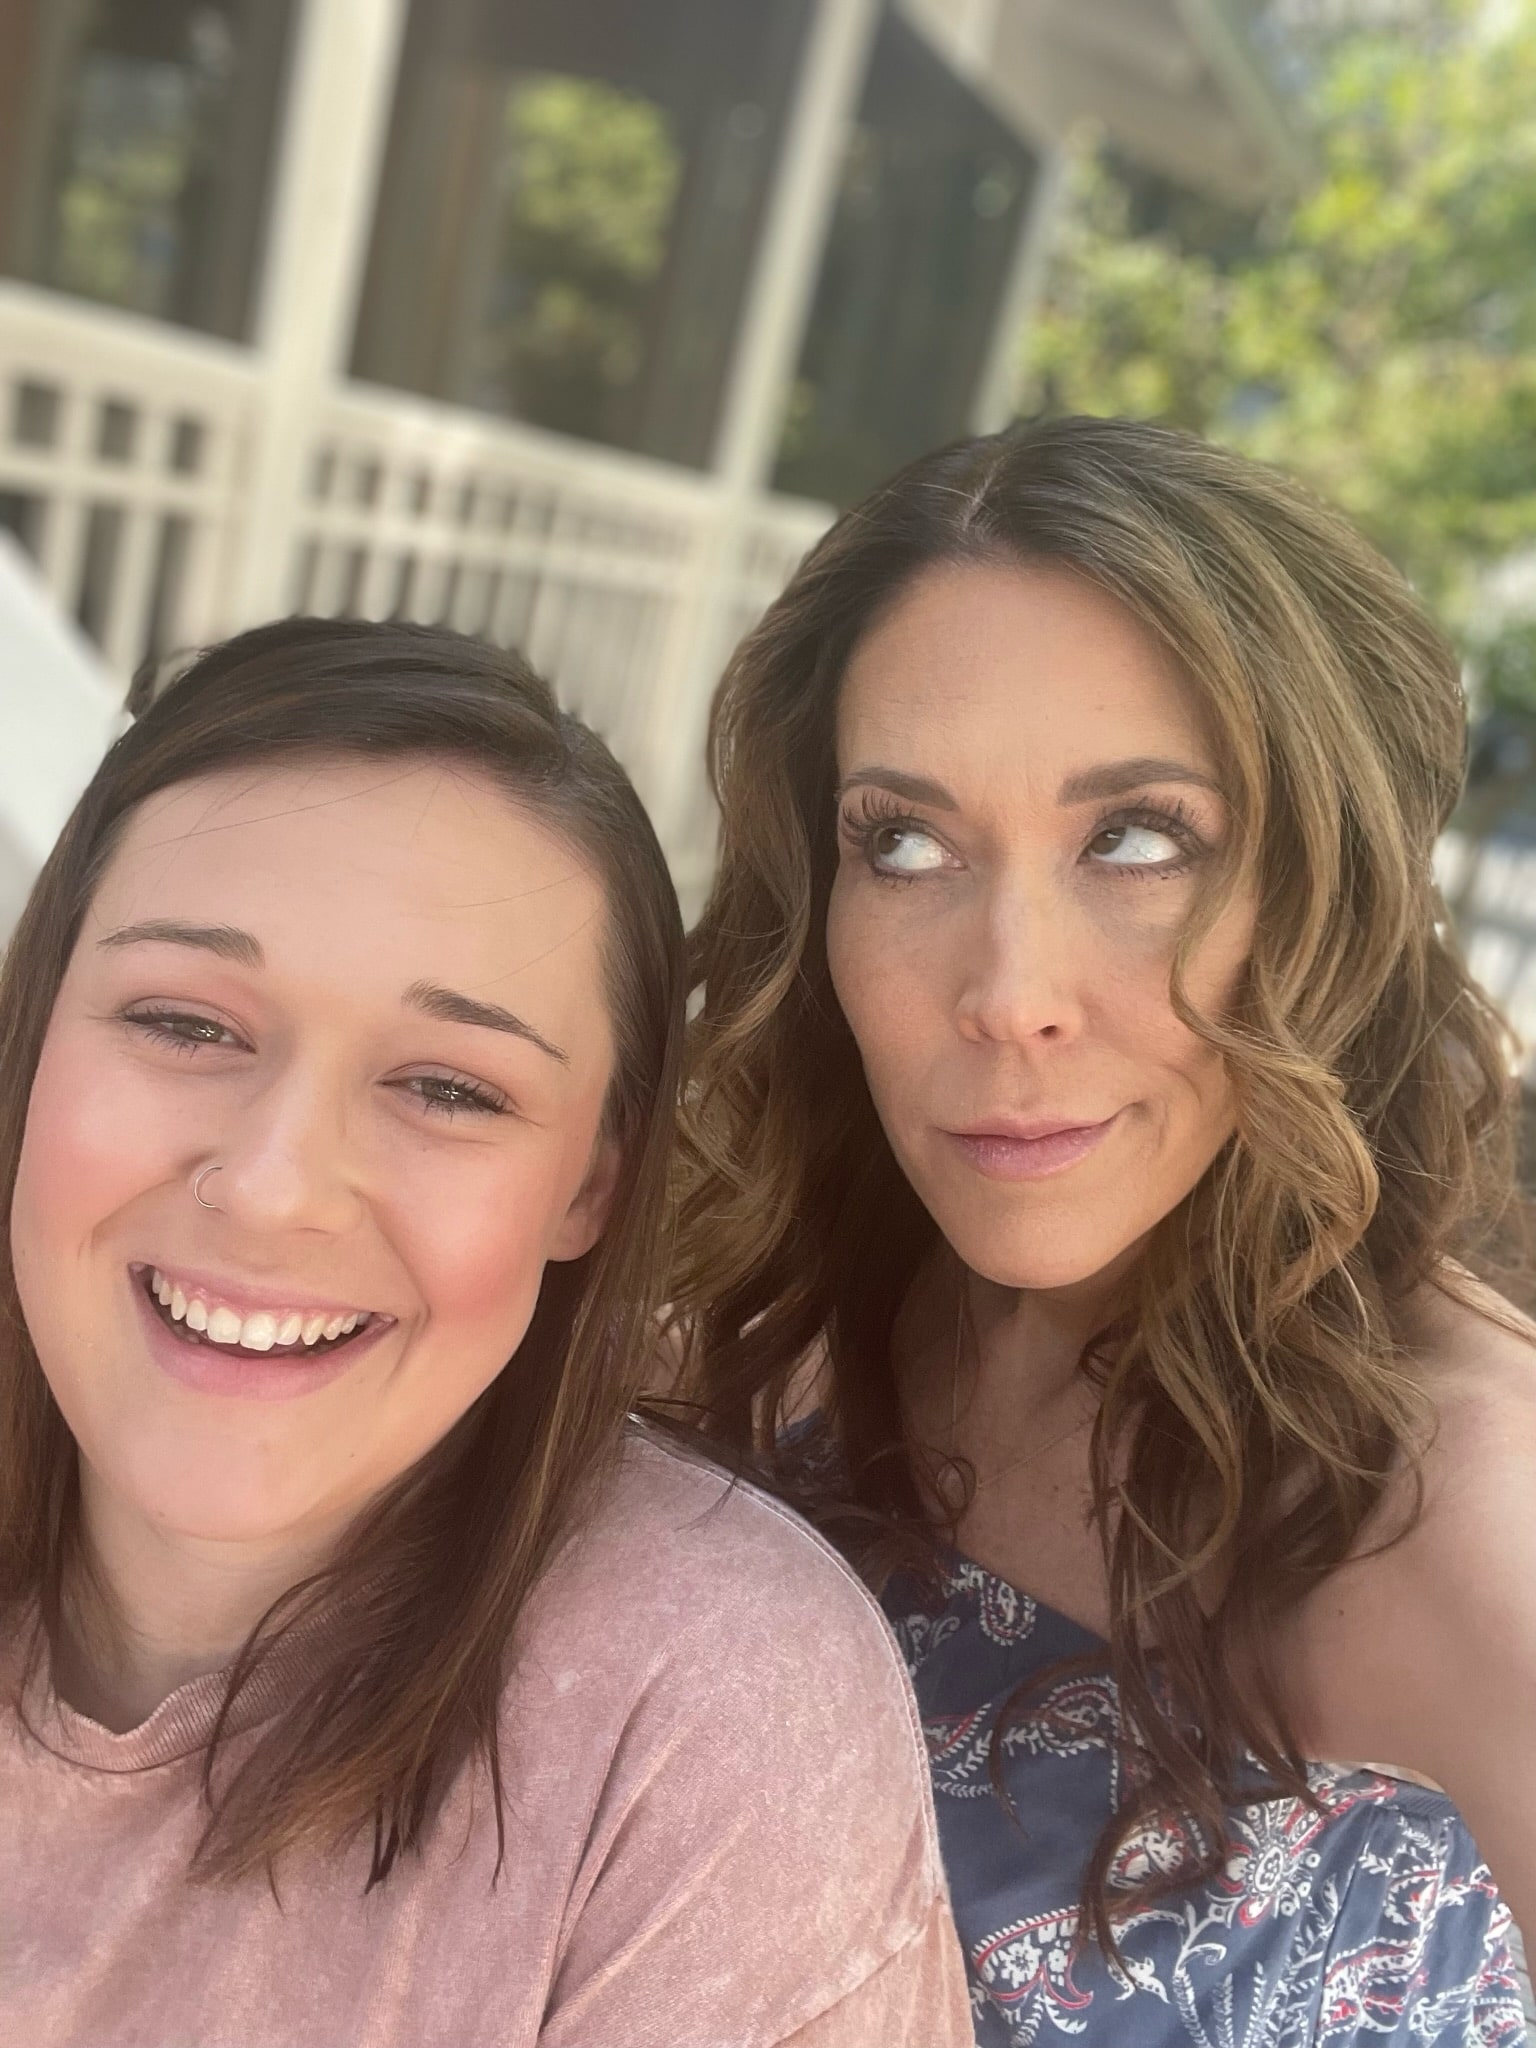 mom making a silly face with daughter